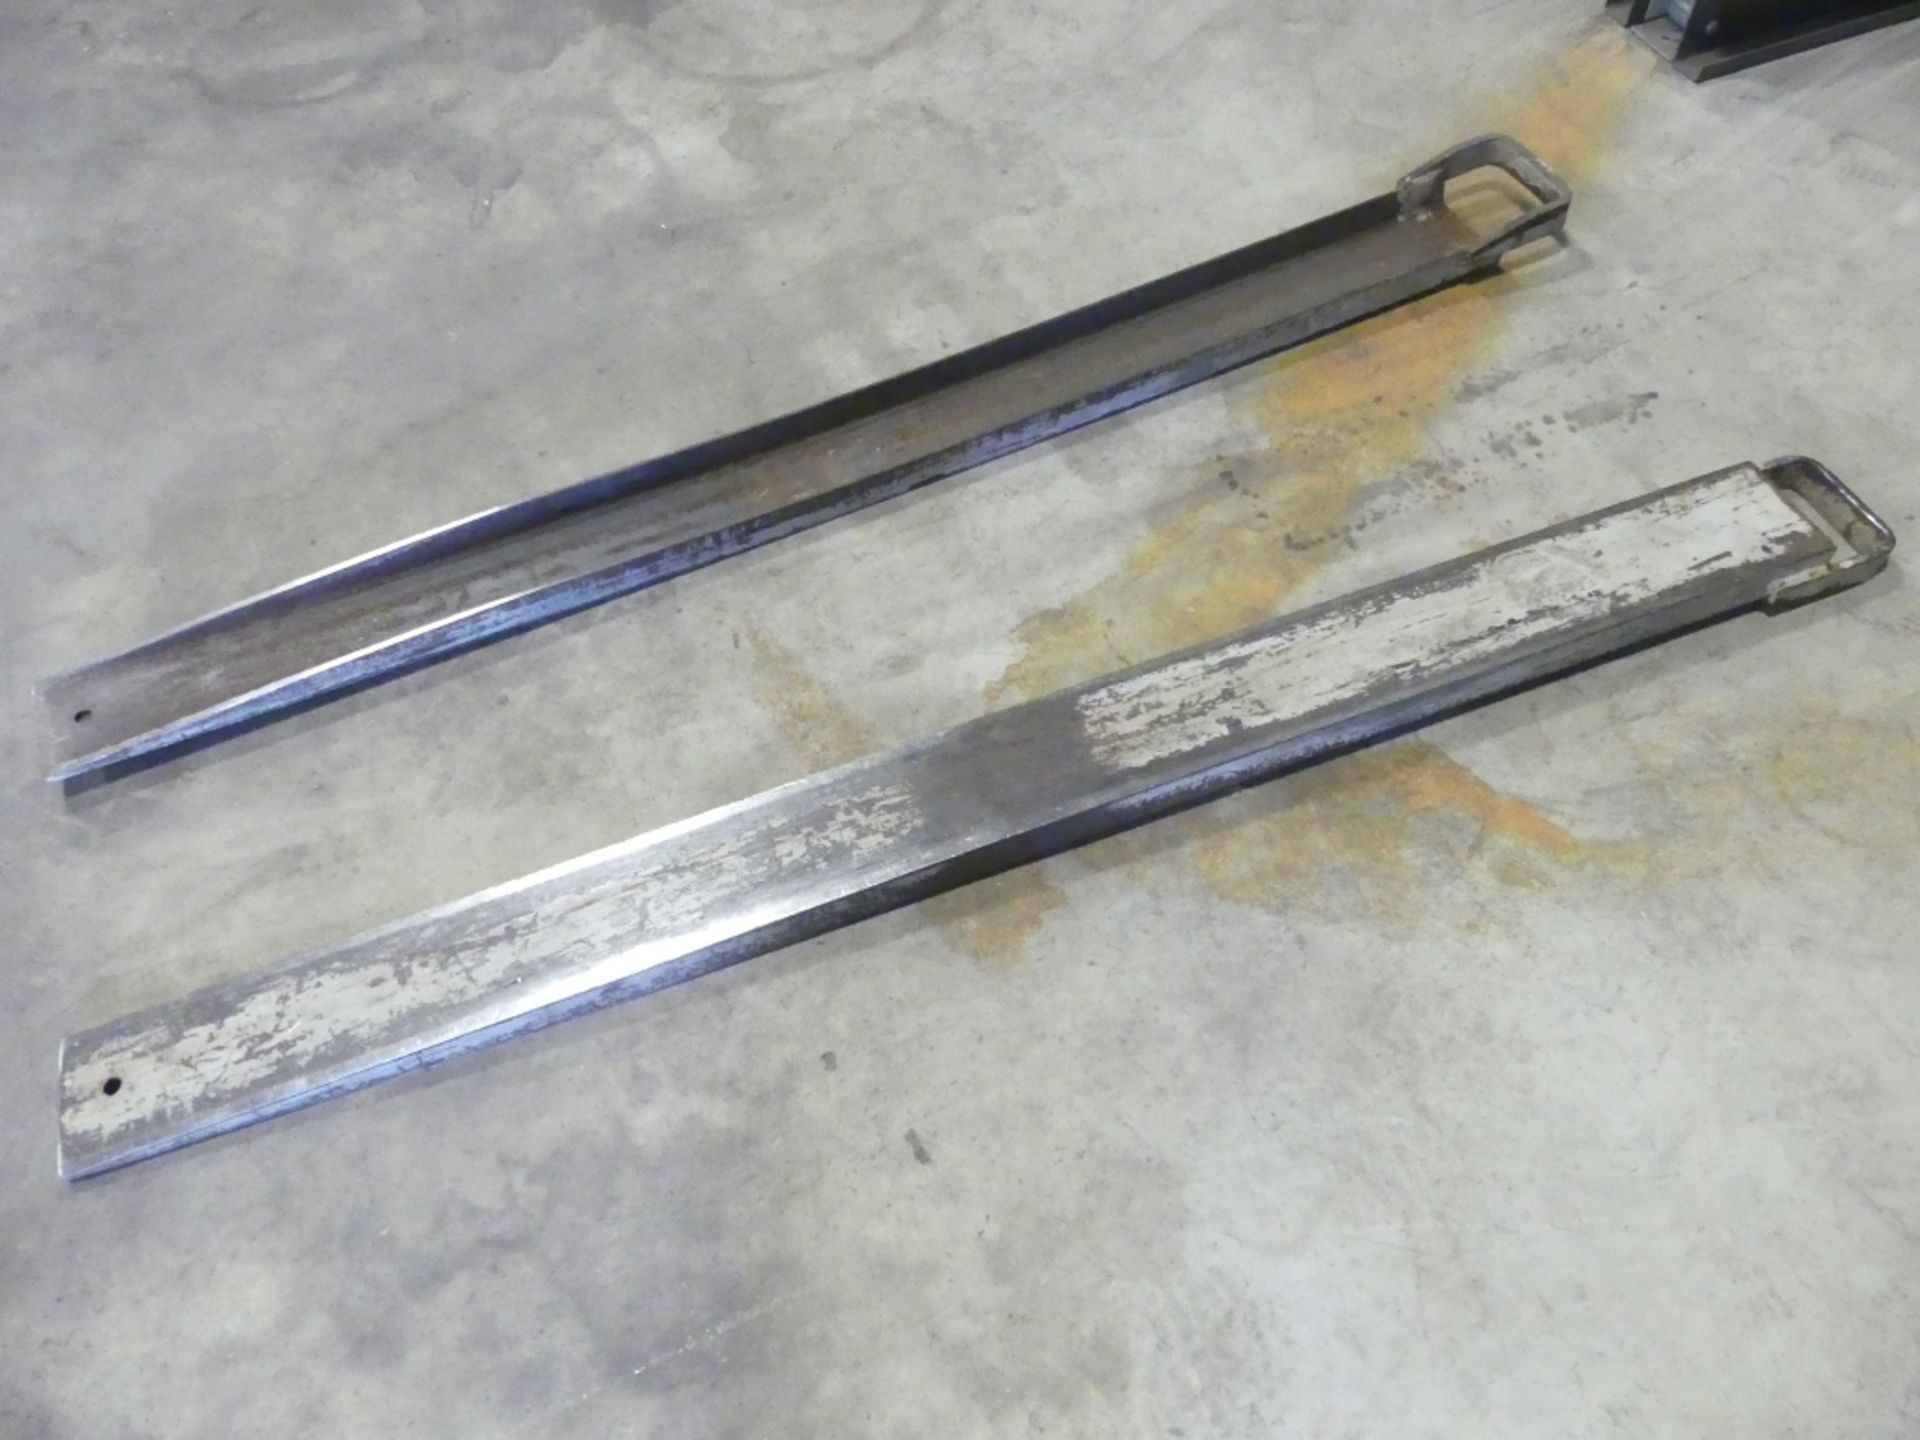 Forklift fork extensions, 1 pair, 78 long" - Image 2 of 2